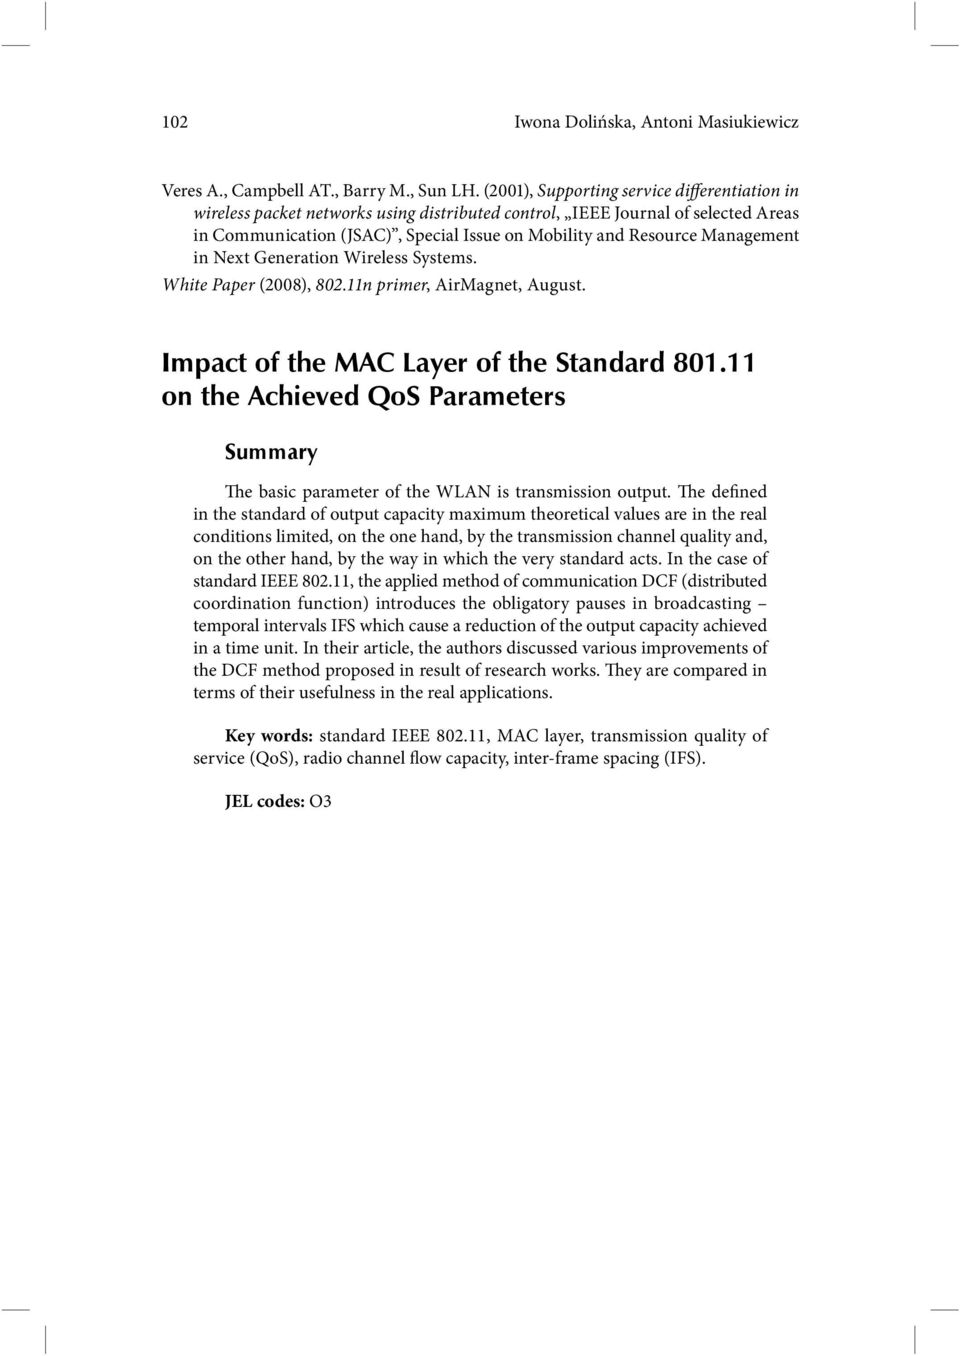 Management in Next Generation Wireless Systems. White Paper (2008), 802.11n primer, AirMagnet, August. Impact of the MAC Layer of the Standard 801.